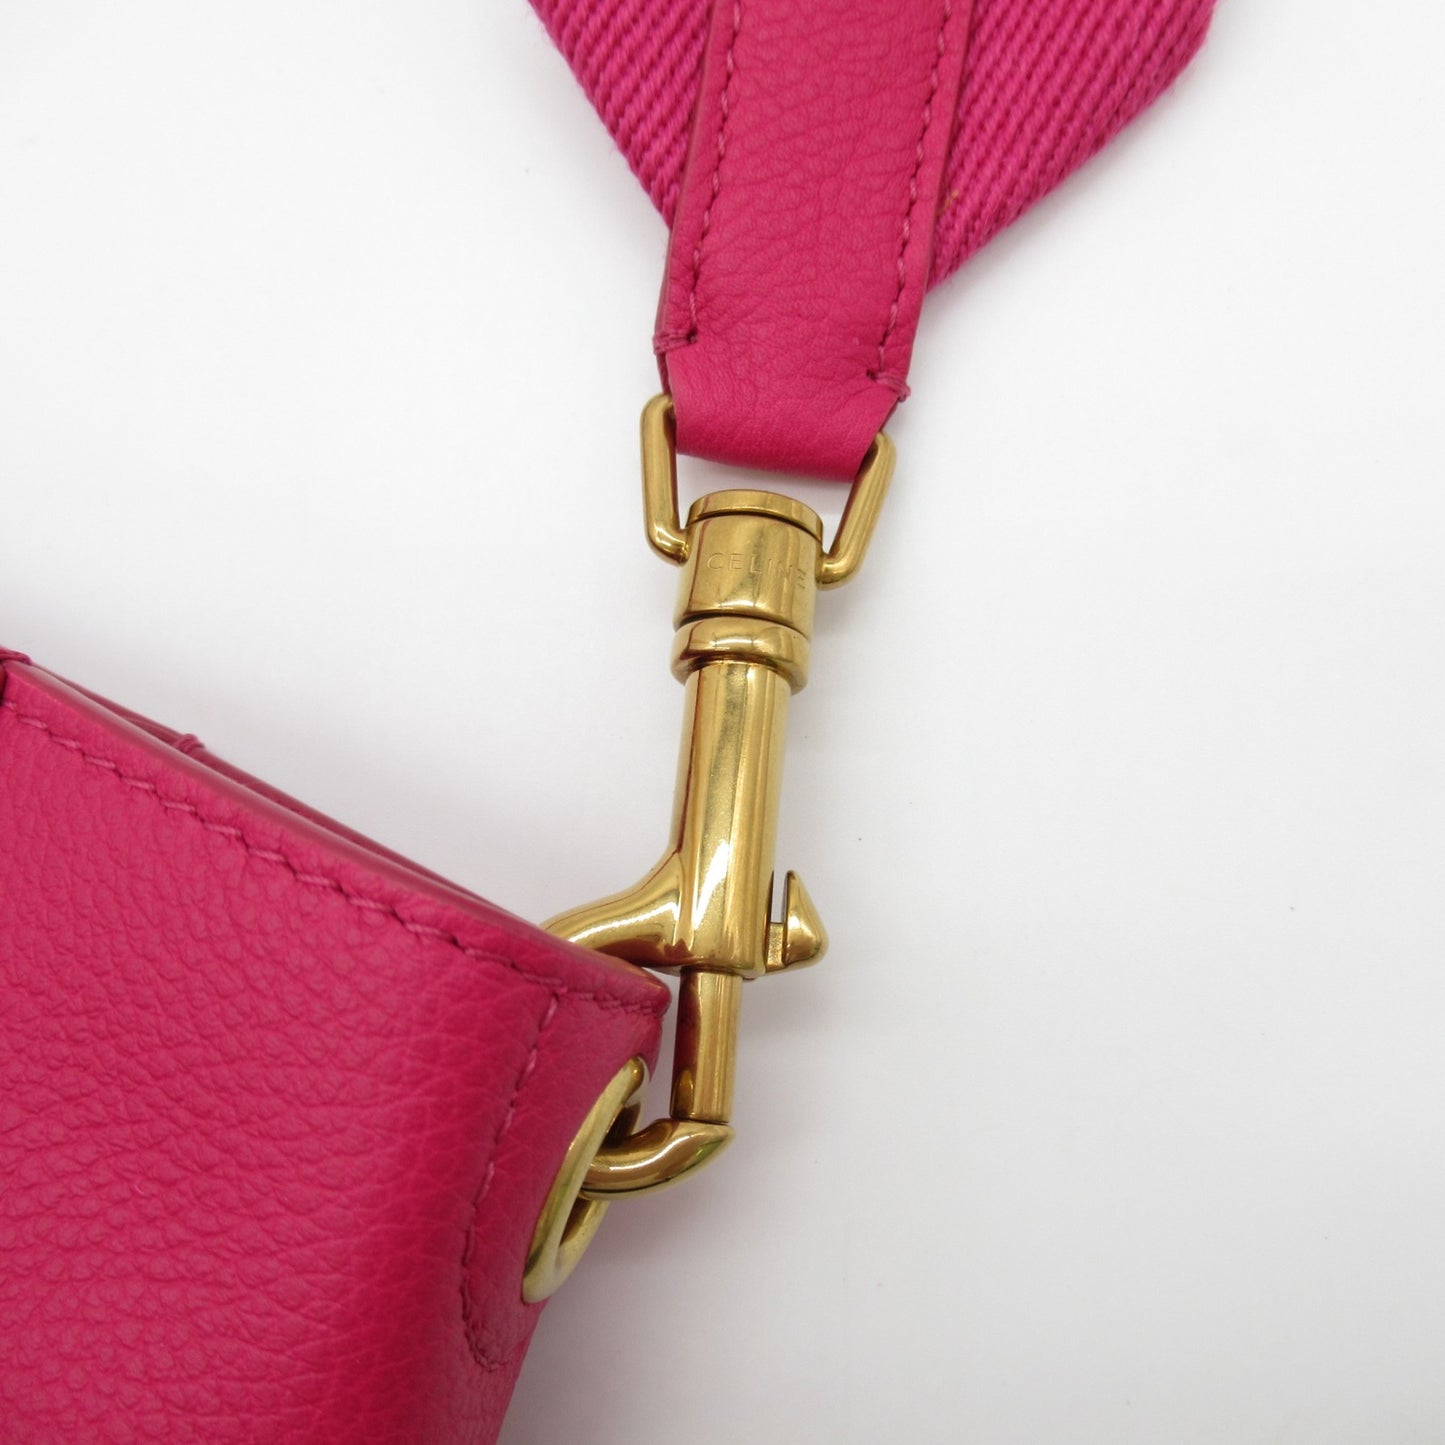 Celine Women's Elegant Leather Shoulder Bag in Pink by French Fashion House in Pink